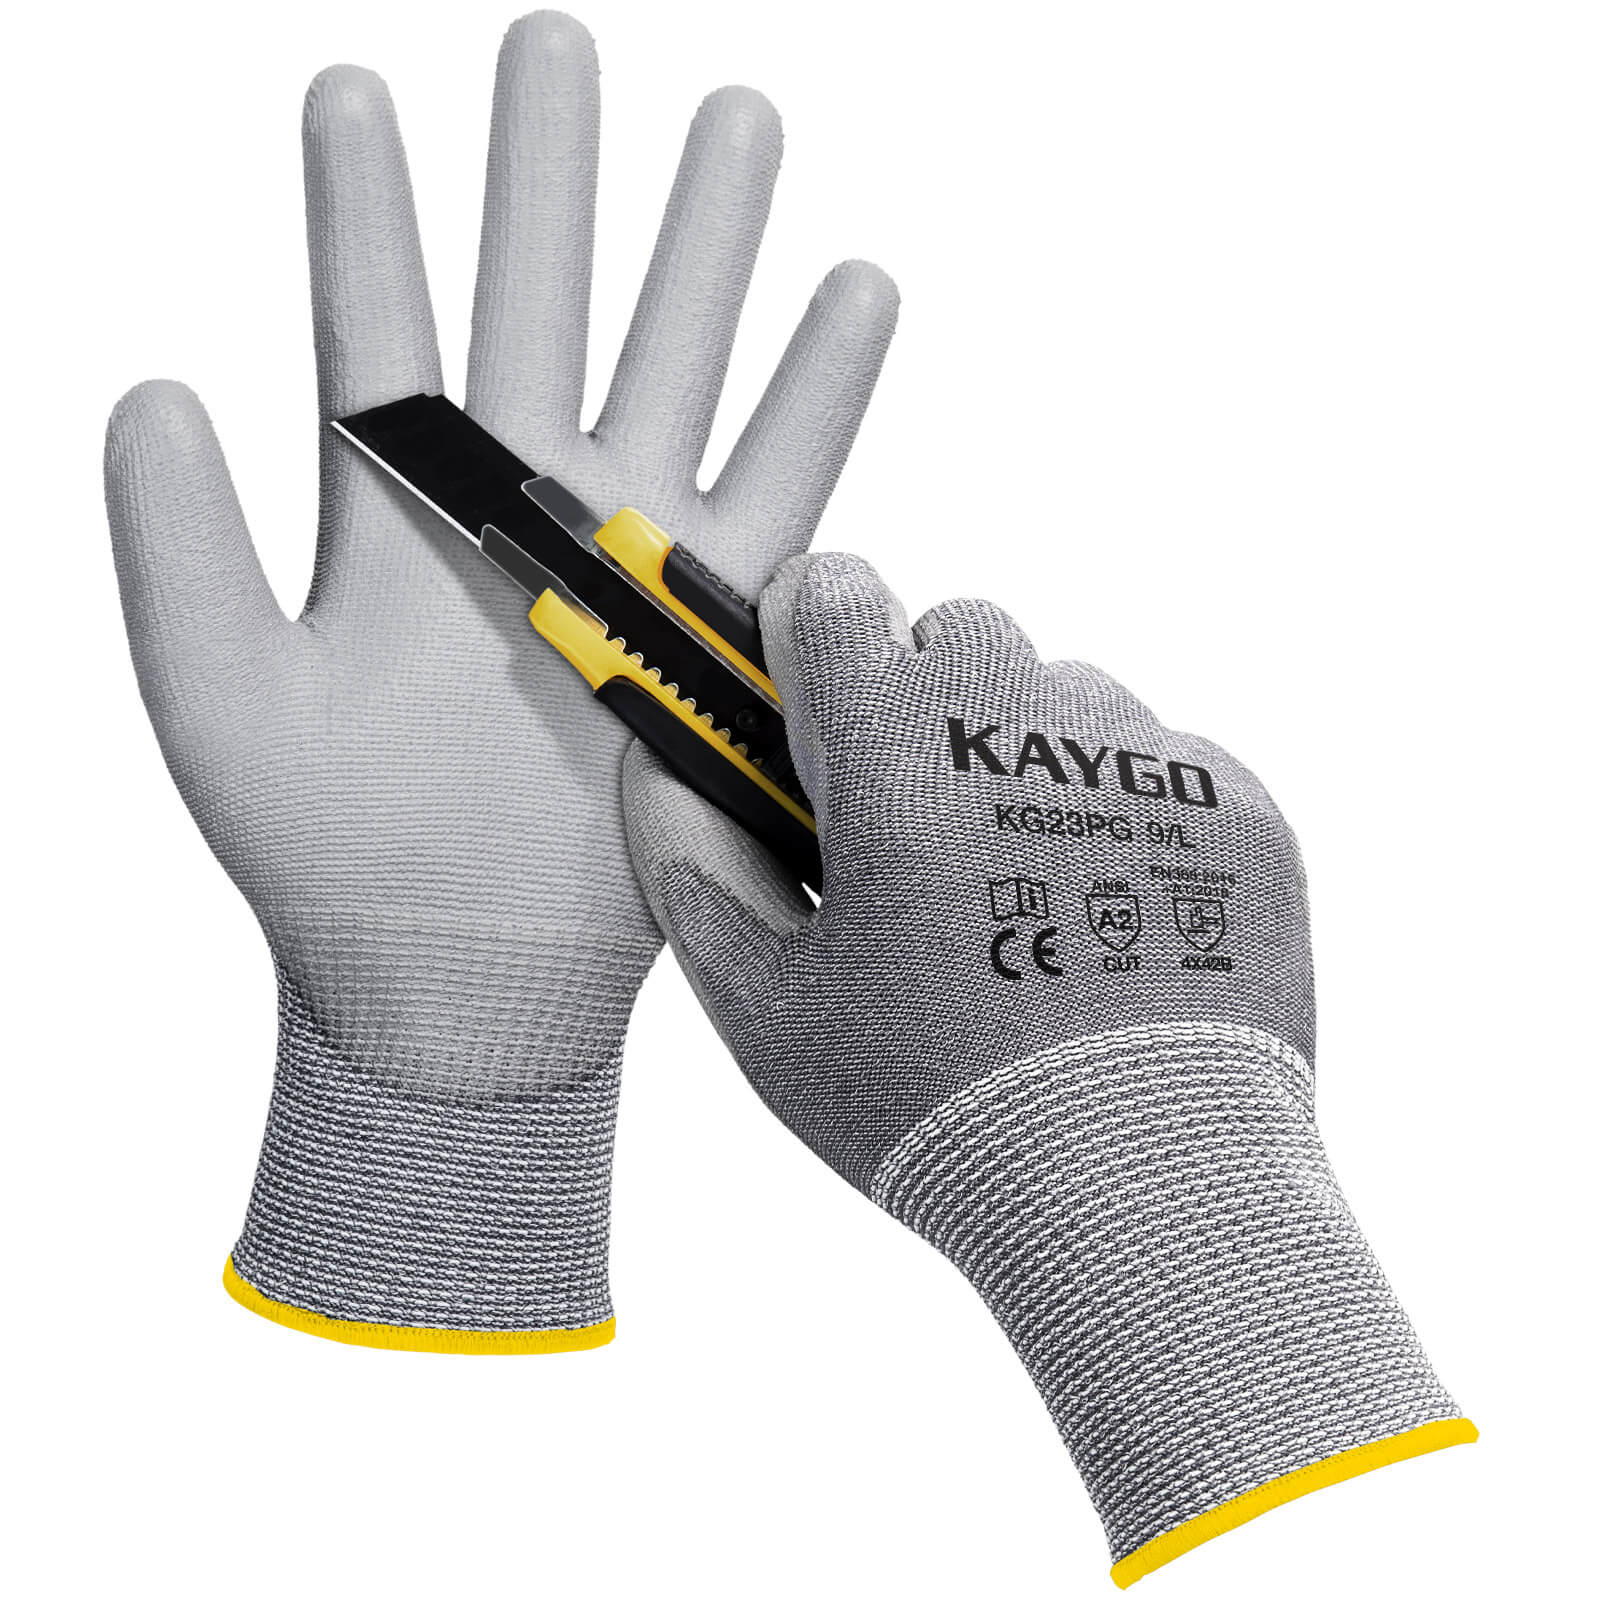 A2 Cut Resistant Gloves with PU Coated Smooth Grip on Palm & Fingers